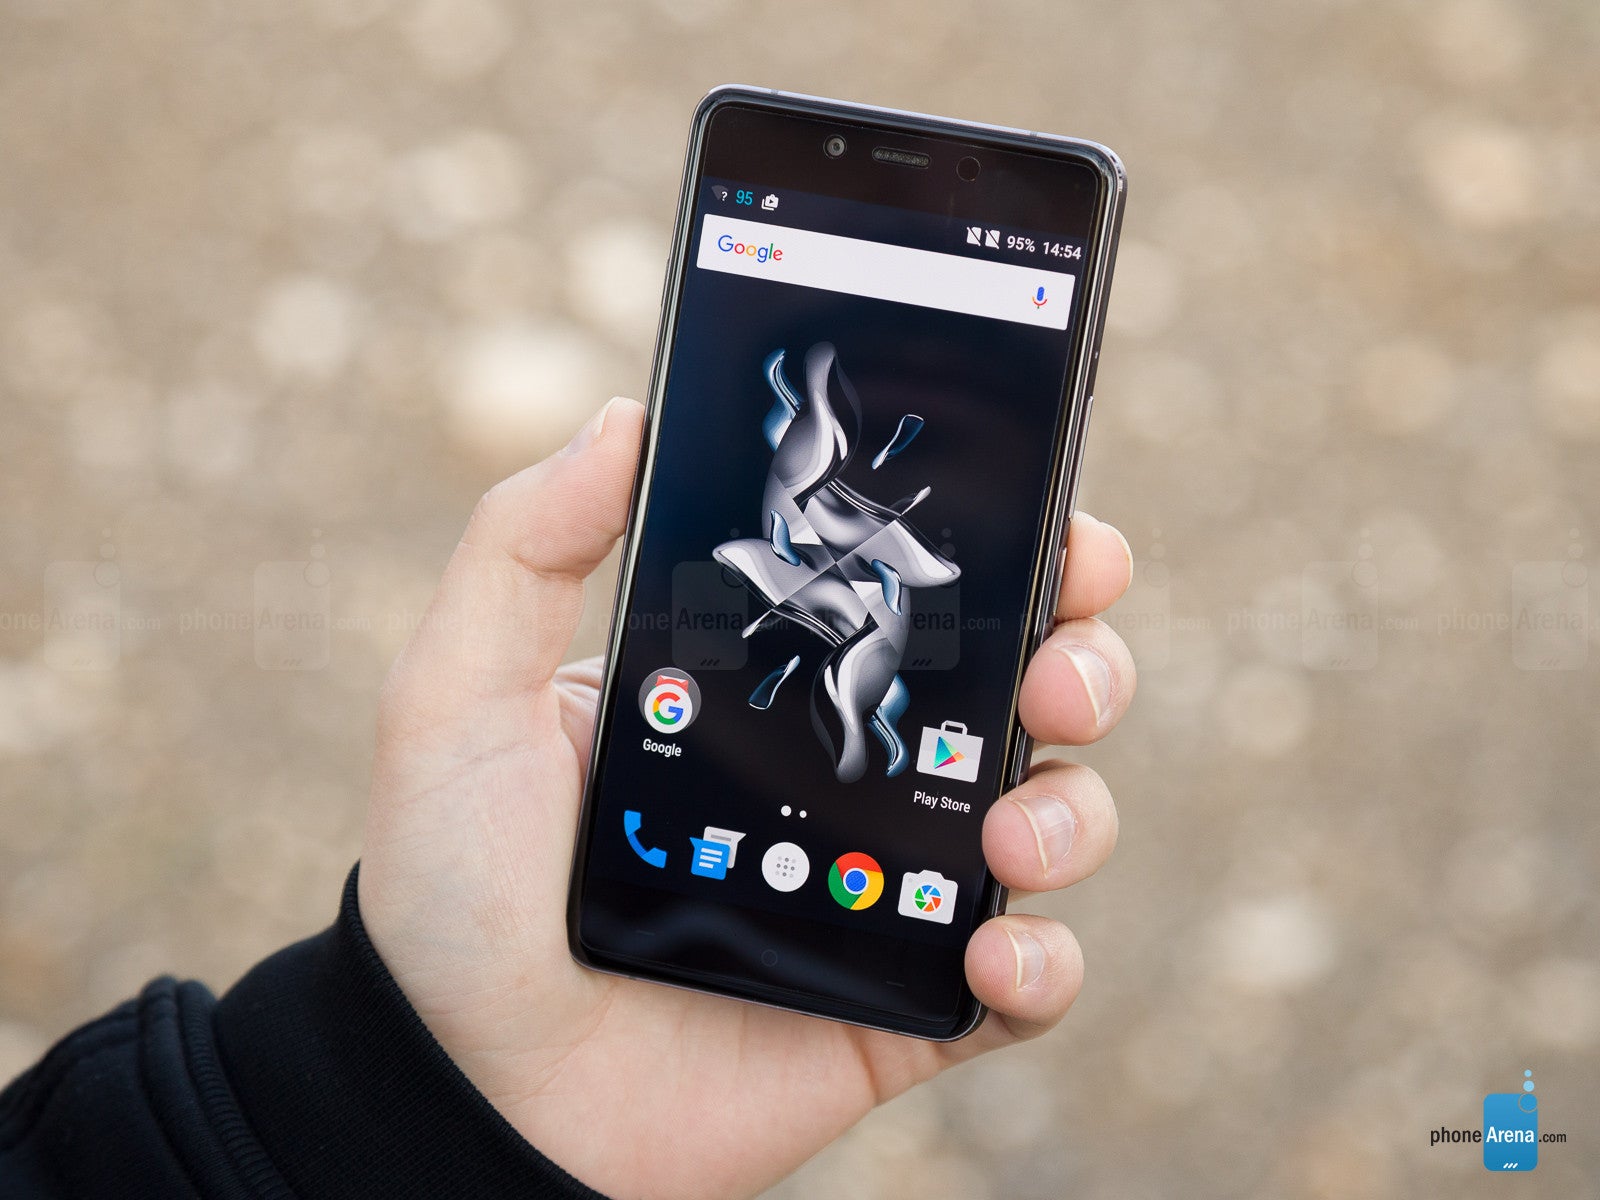 OnePlus X one step closer to getting Android 6.0.1 Marshmallow update